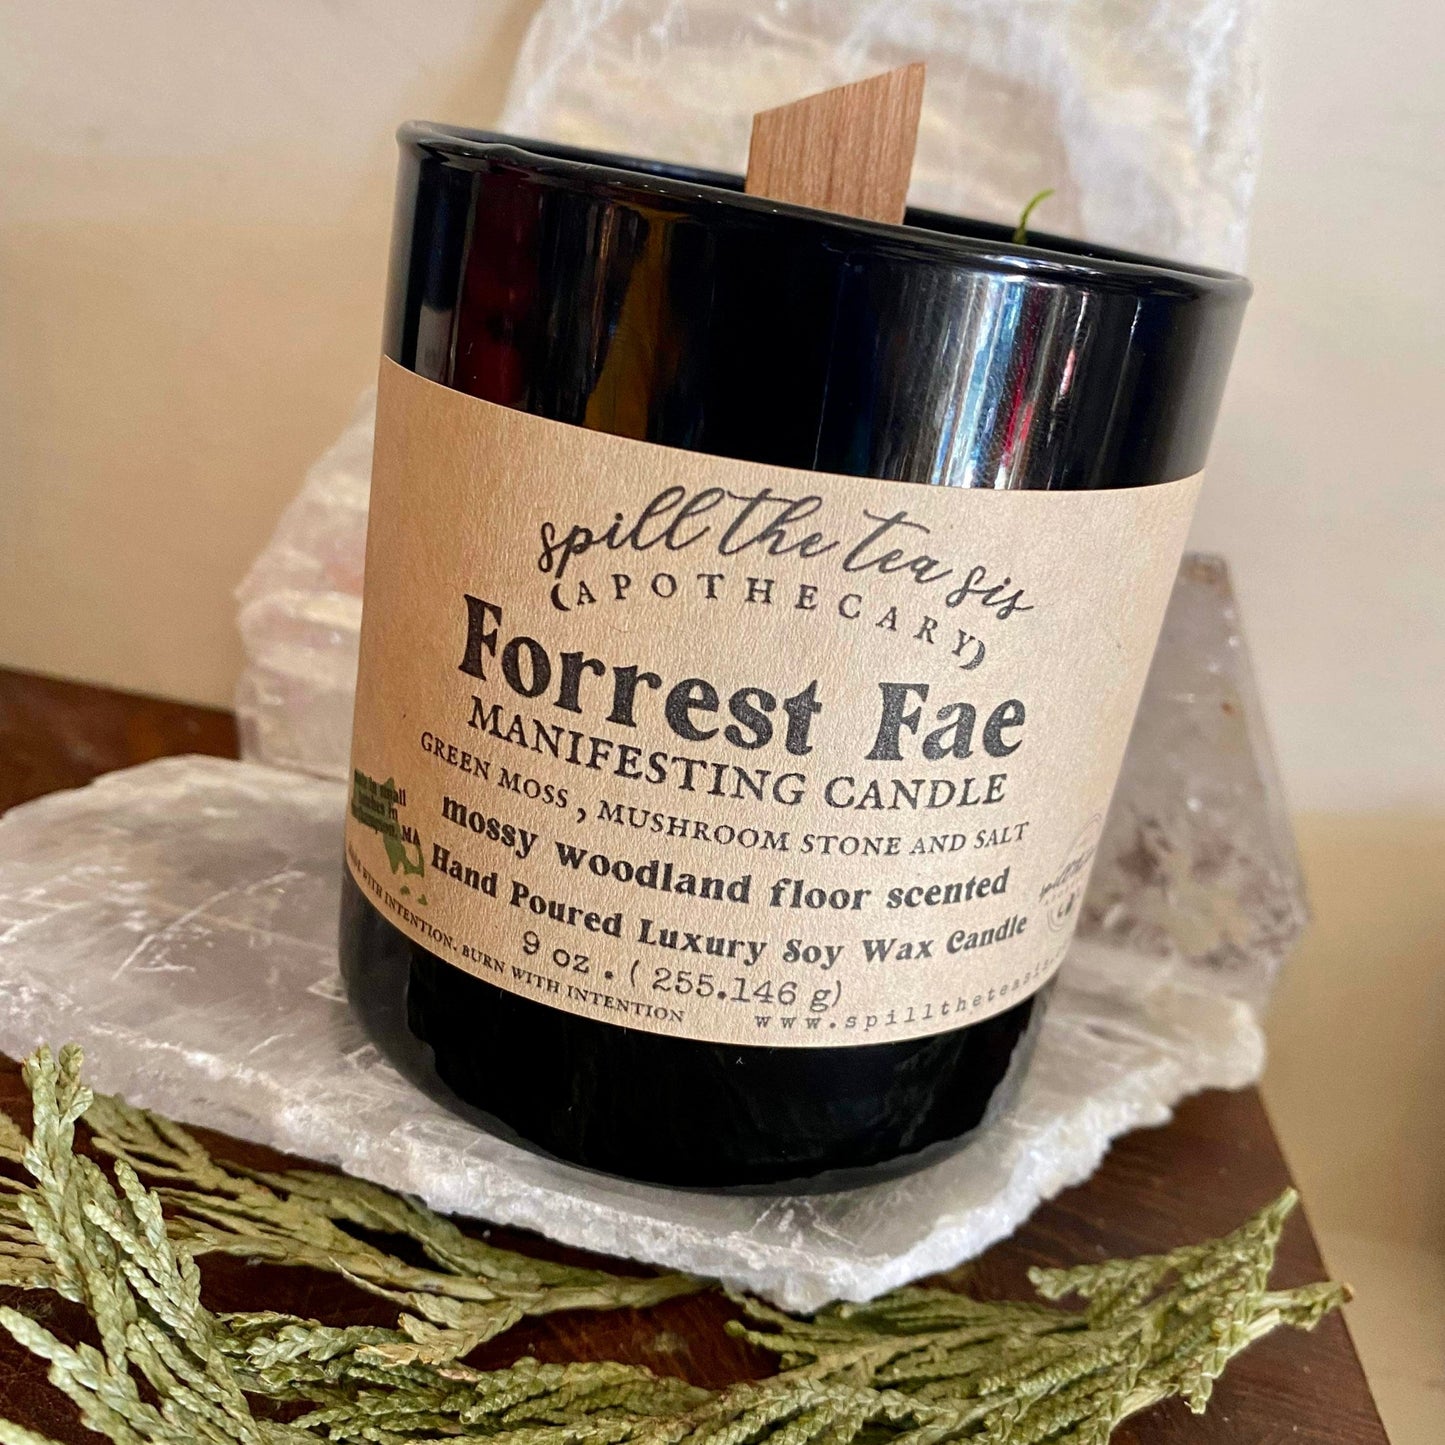 Forrest Fae Fairy Magic Intention Soy Wax Candle - 9oz